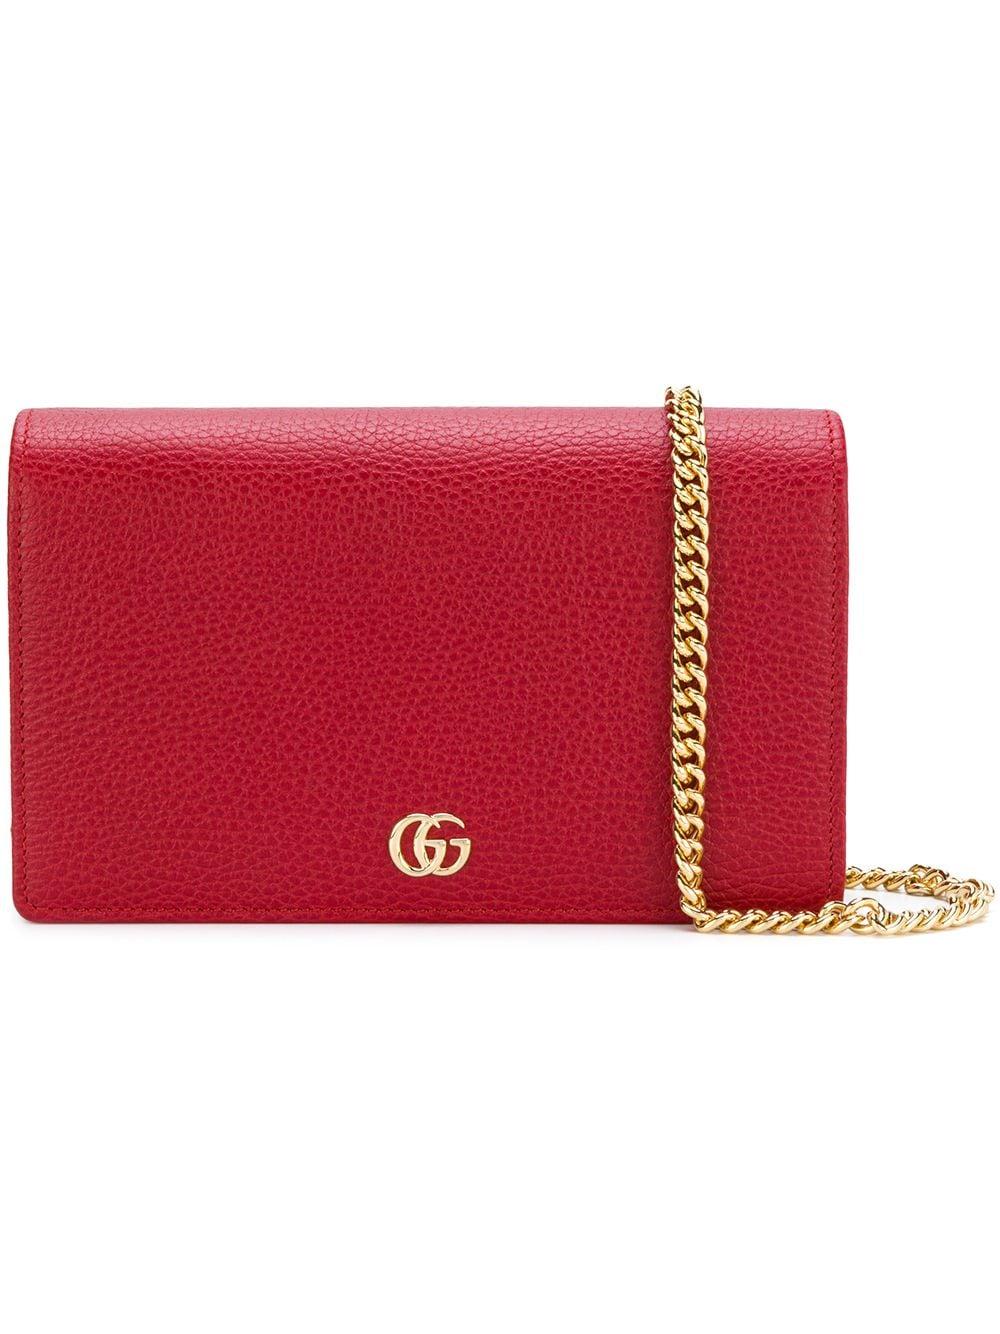 Gucci GG Marmont Mini Chain Bag in Red | Lyst